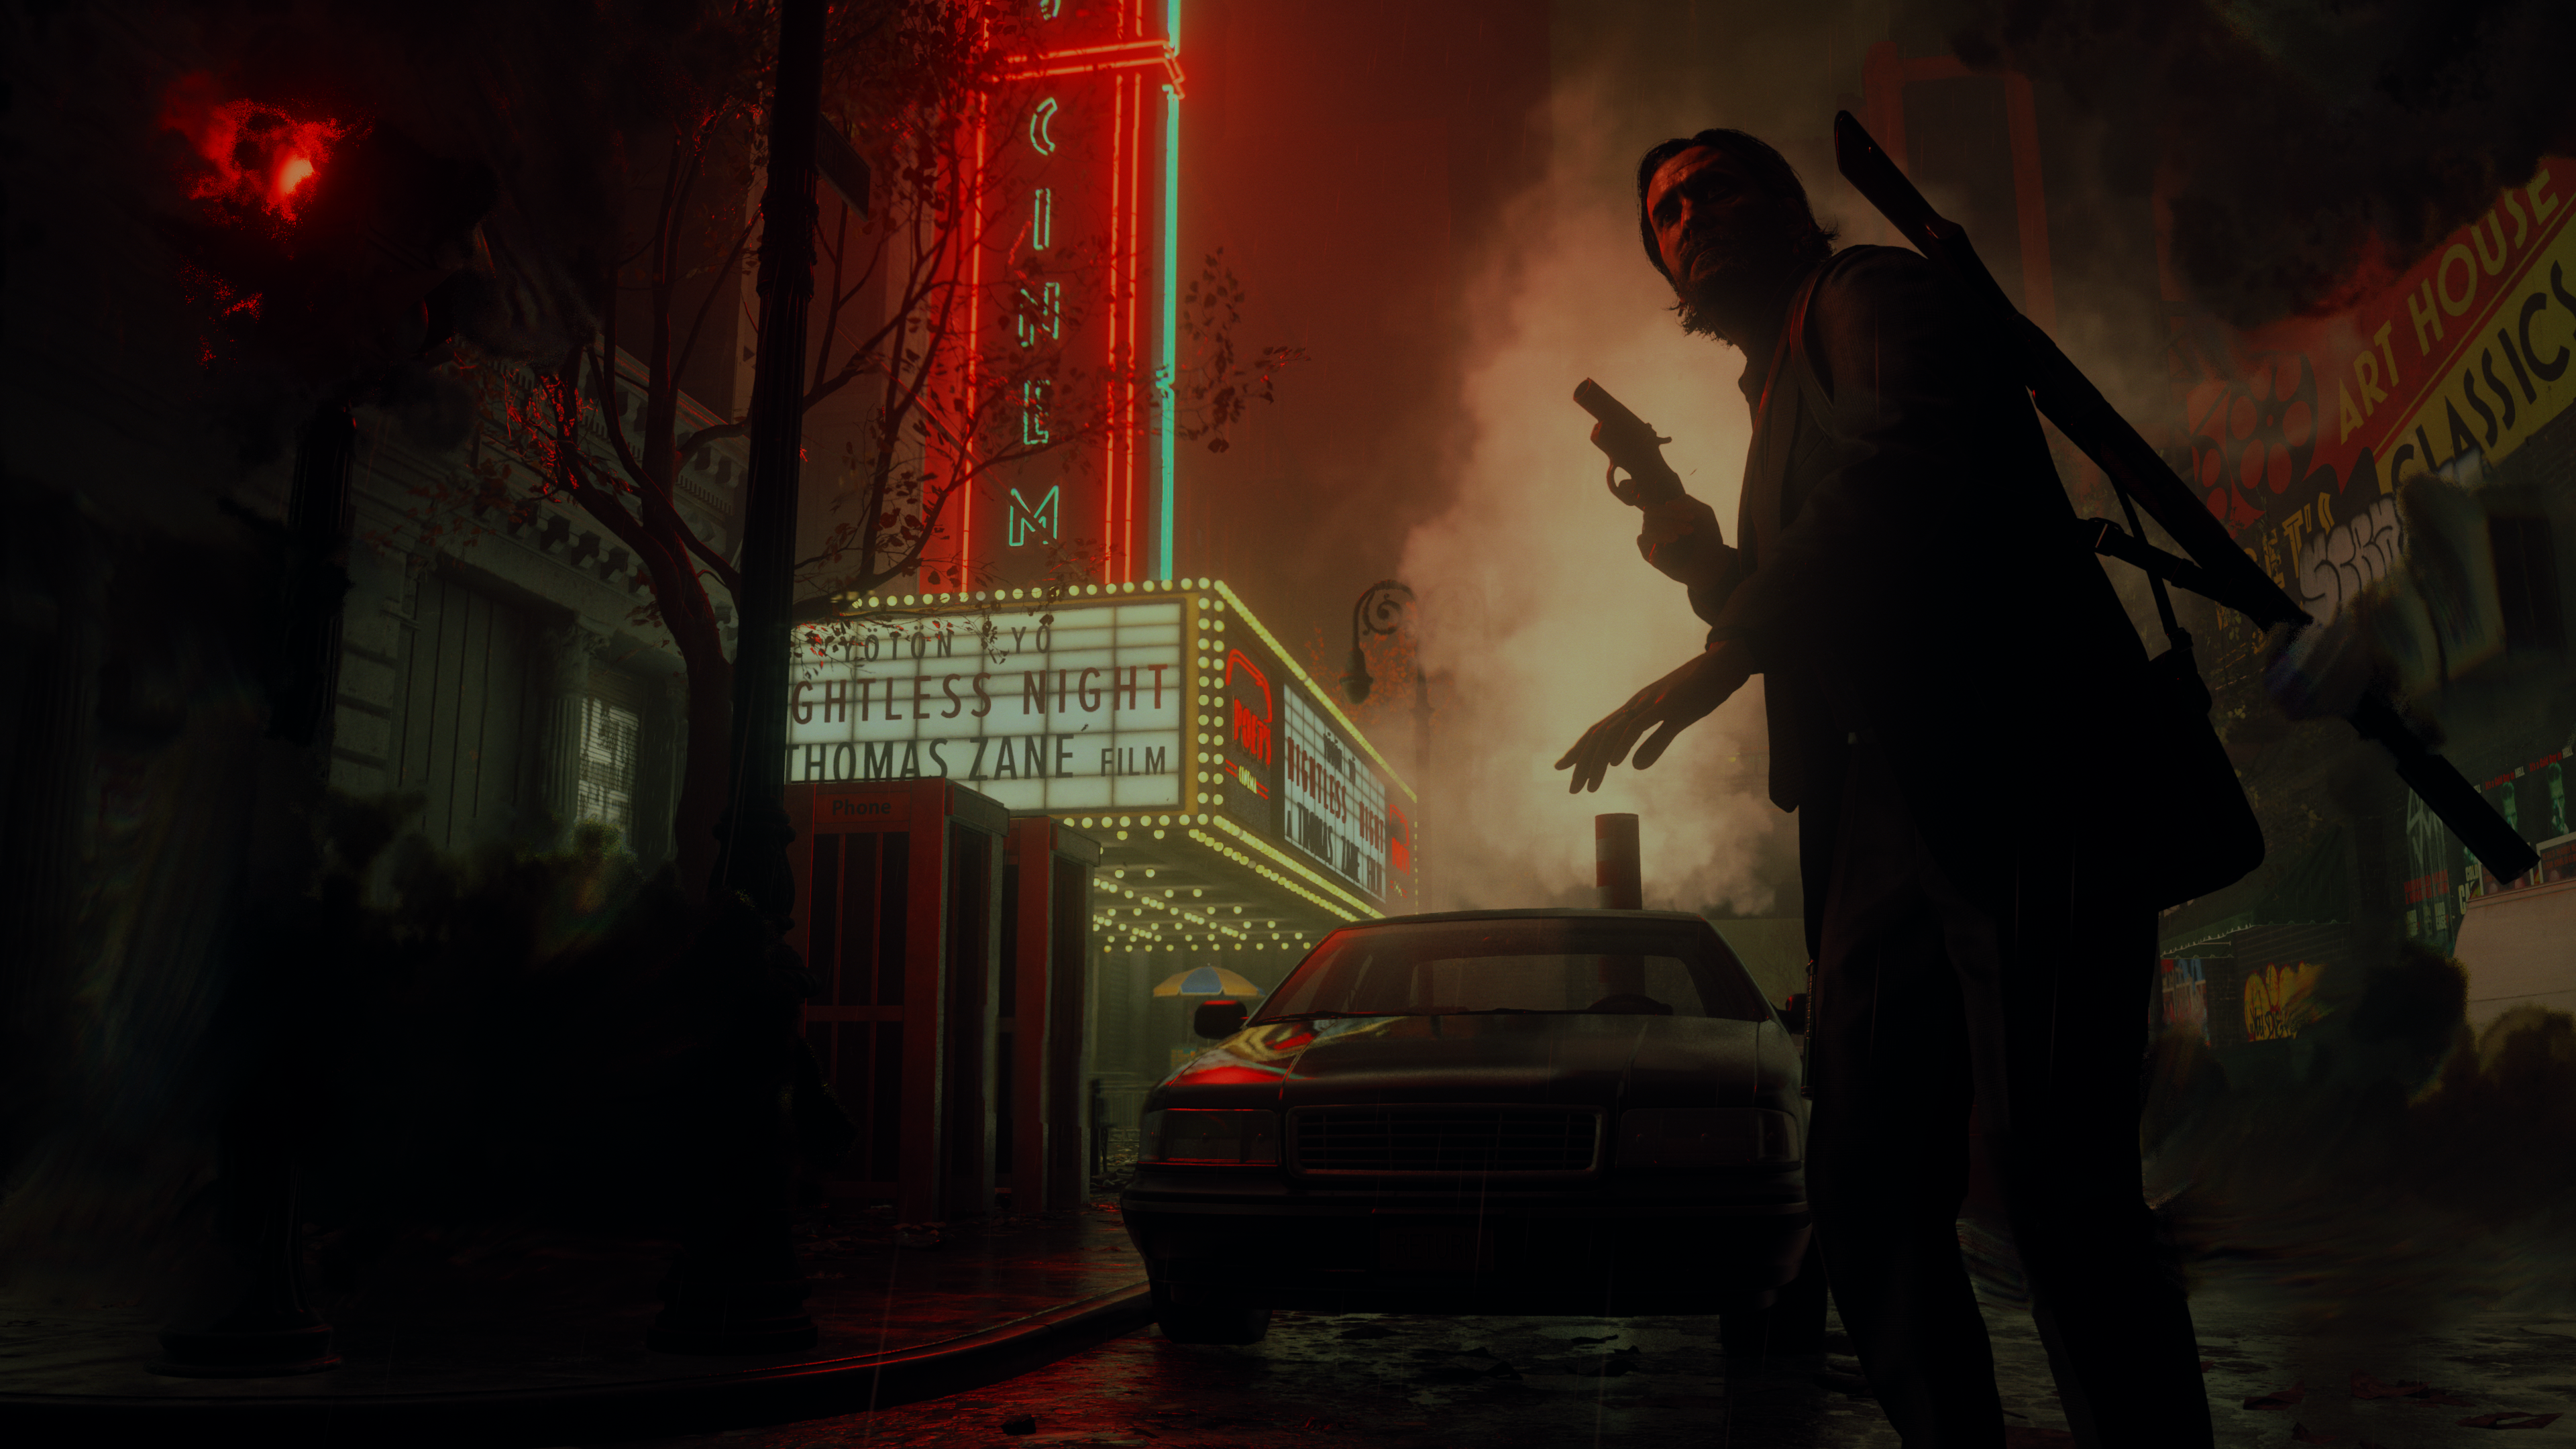 Alan Wake 2 review: standout horror sequel embraces the unknown